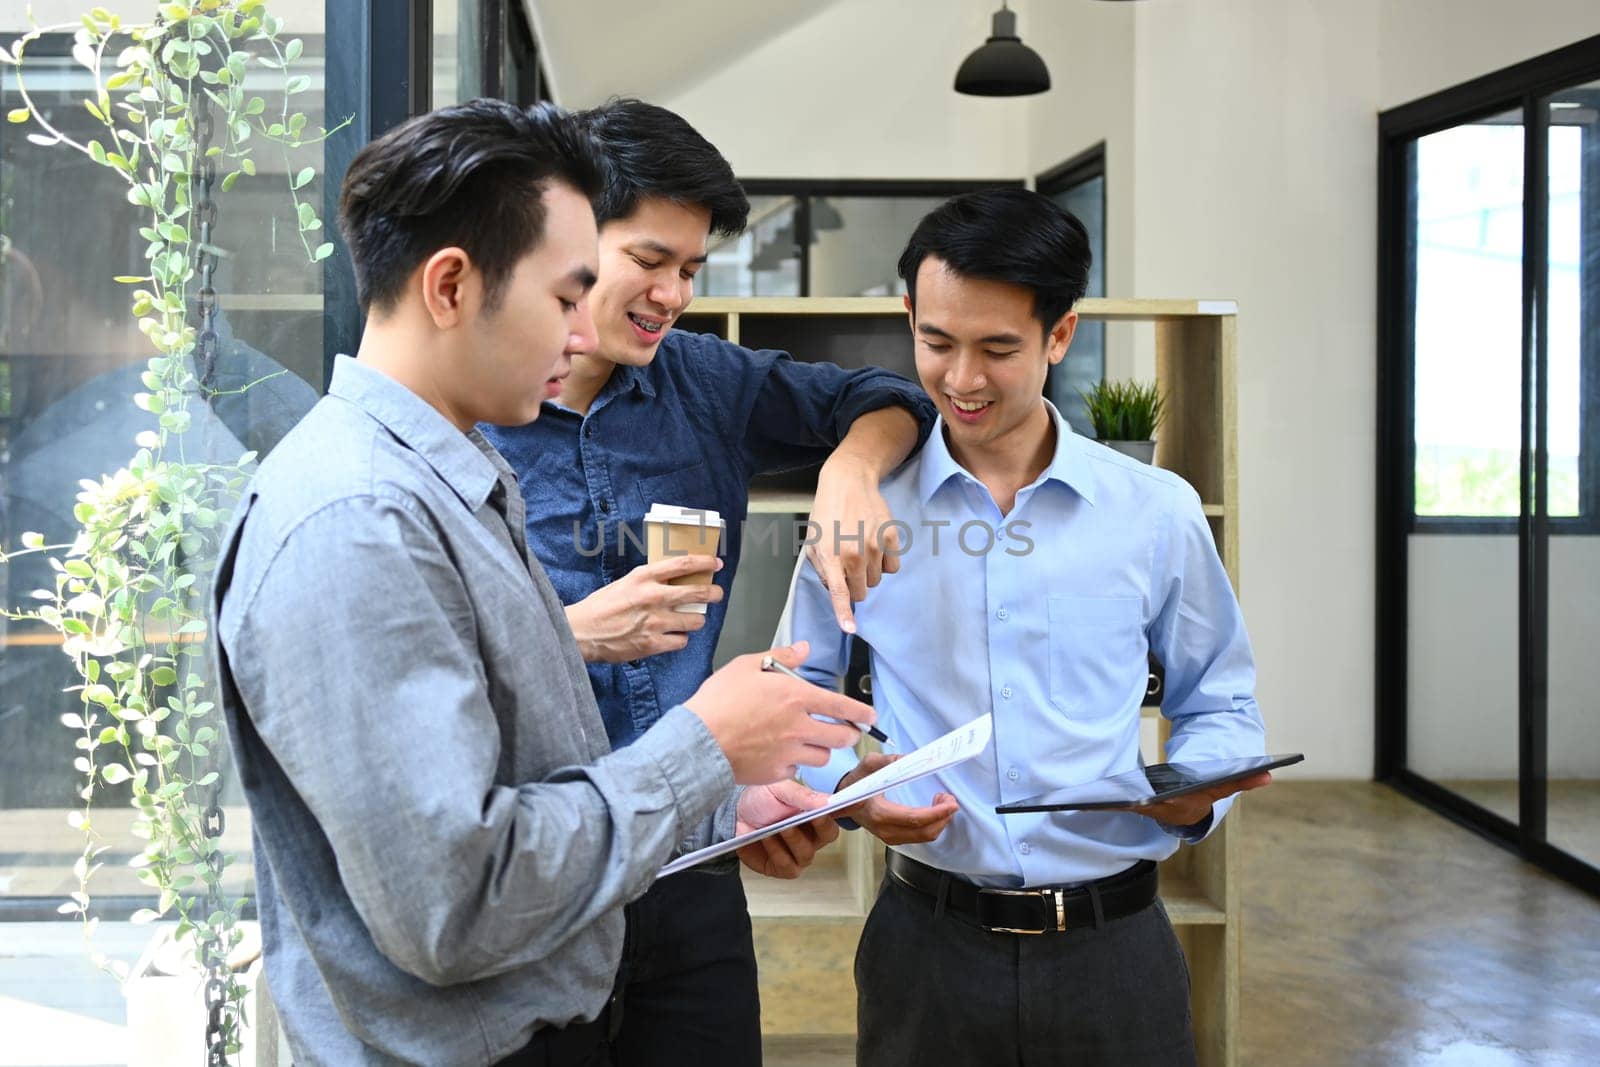 Group of businesspeople discussing startup project sharing business ideas chatting during coffee break in office.